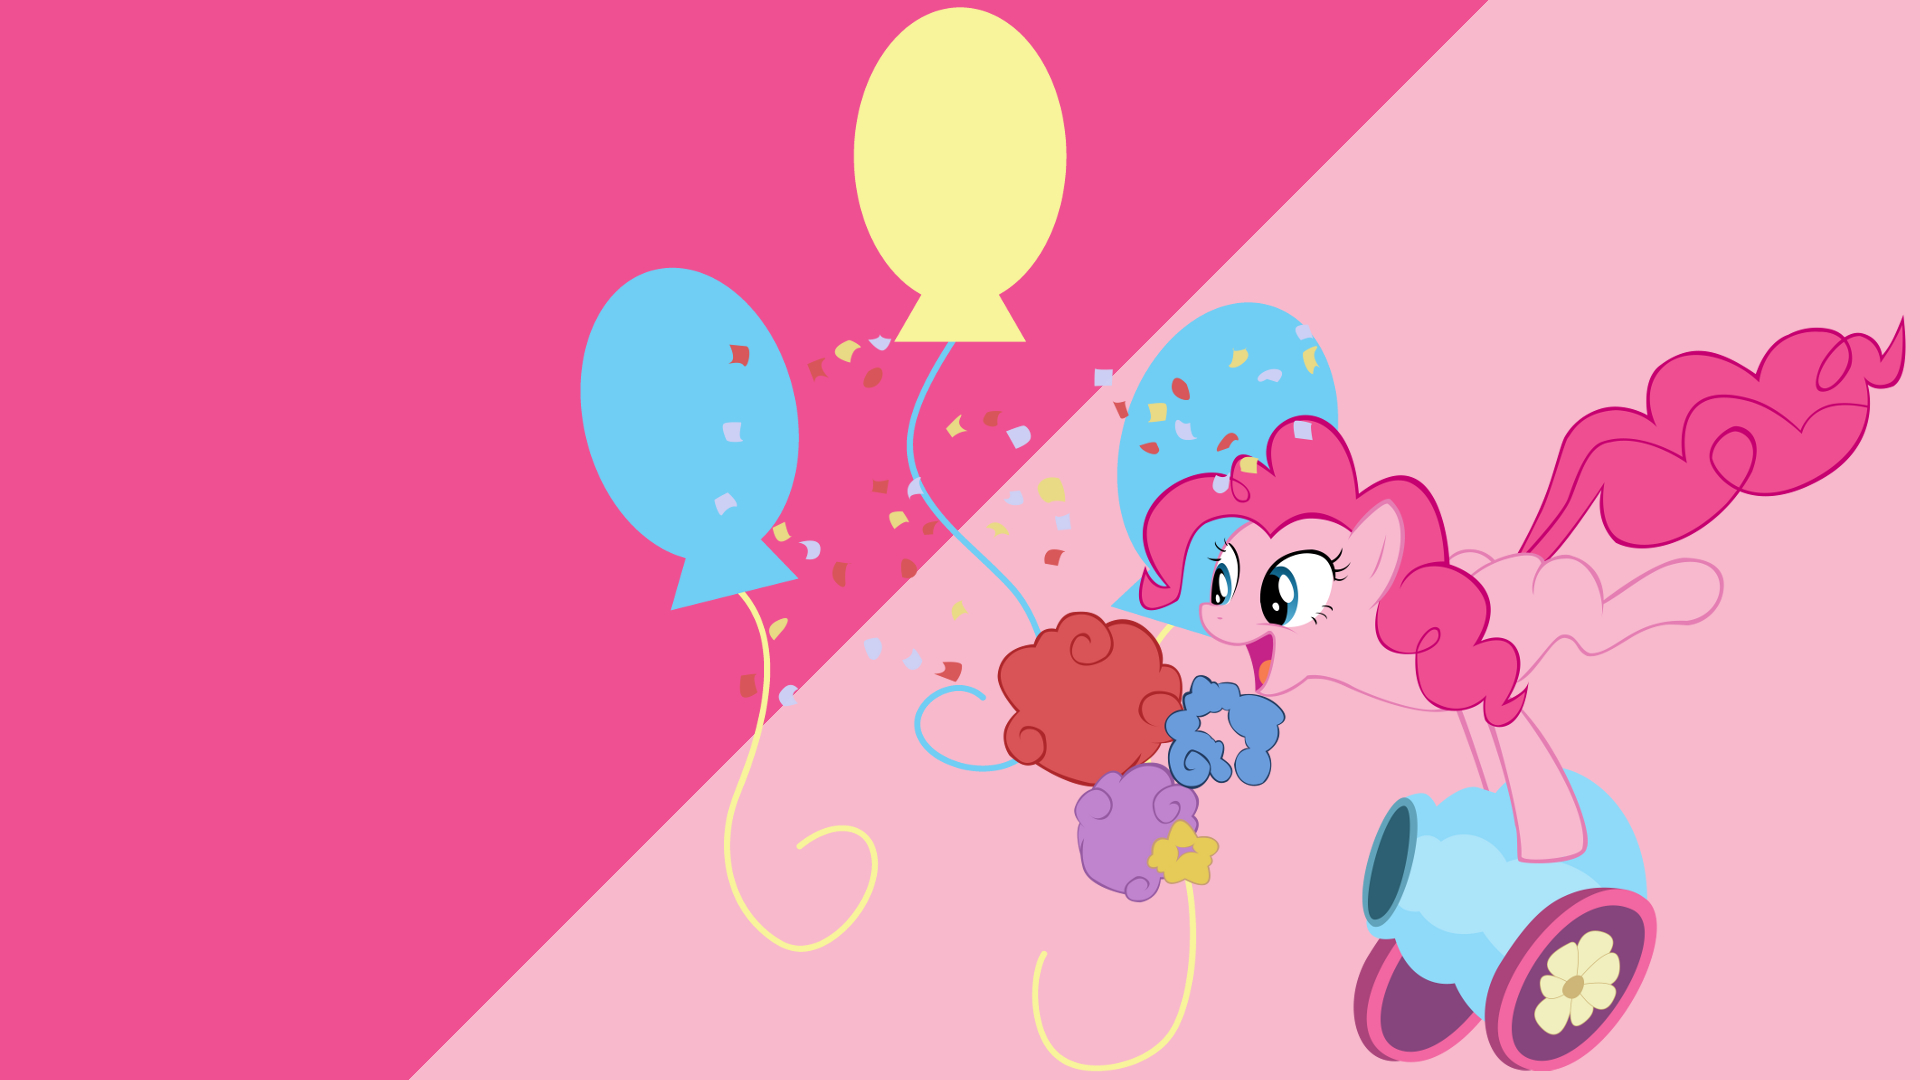 Minimalist Wallpaper 16: Pinkie Pie by chriss88, ooklah and Softfang